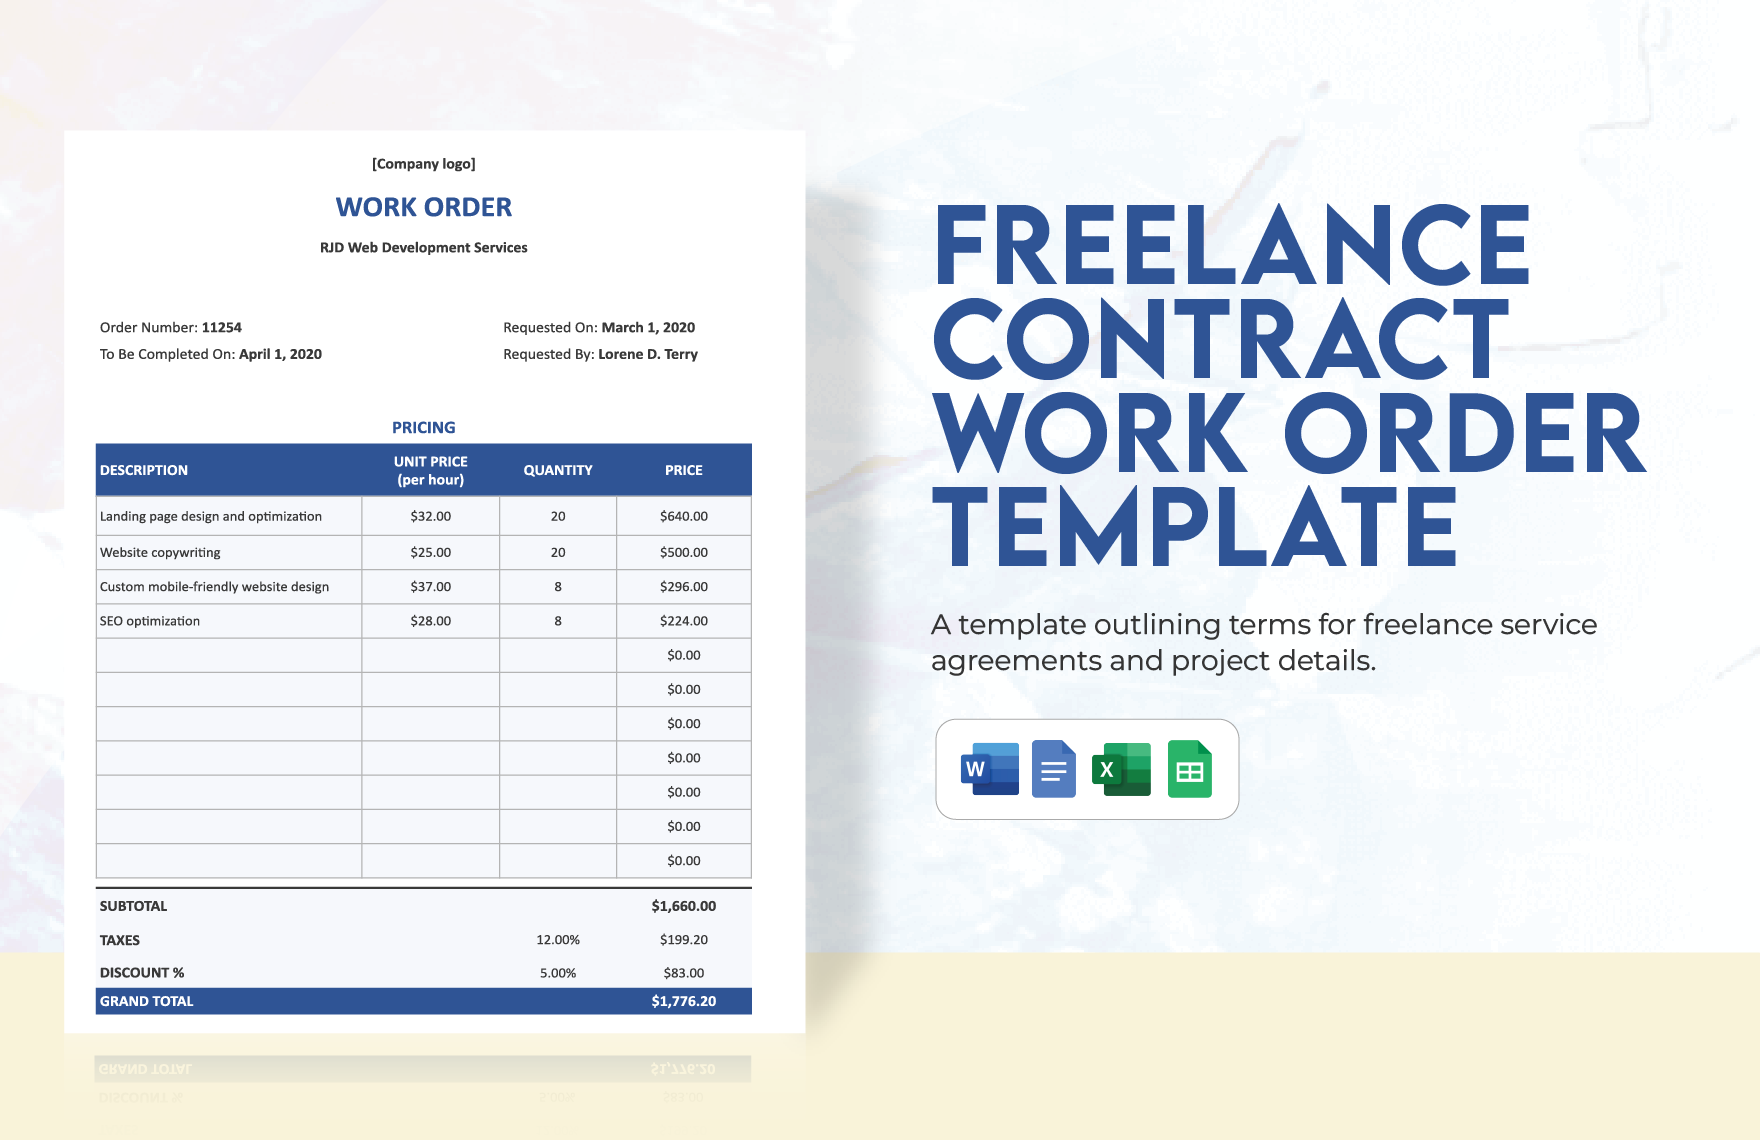 Freelance Contract Work Order Template in Word, Google Docs, Excel, Google Sheets